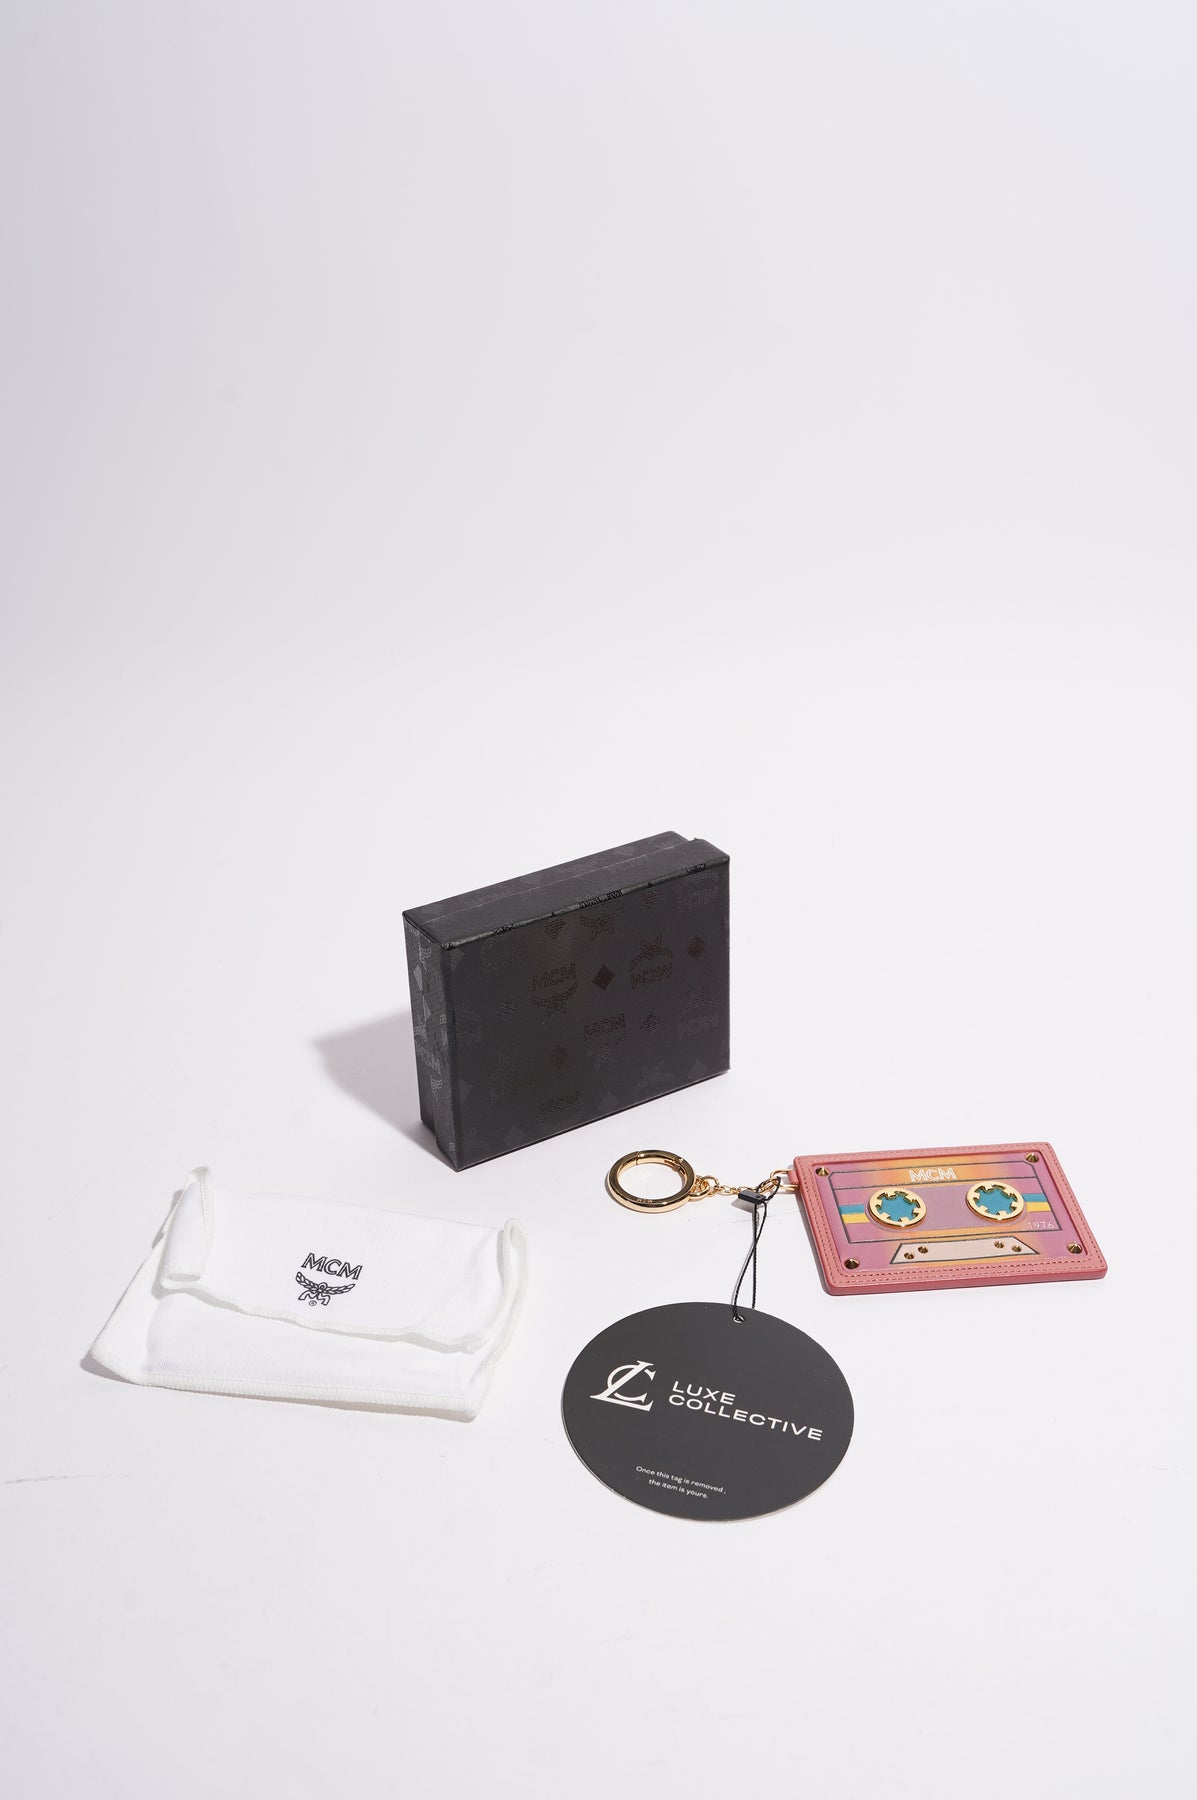 Pink Luxe Card Holder Keychain